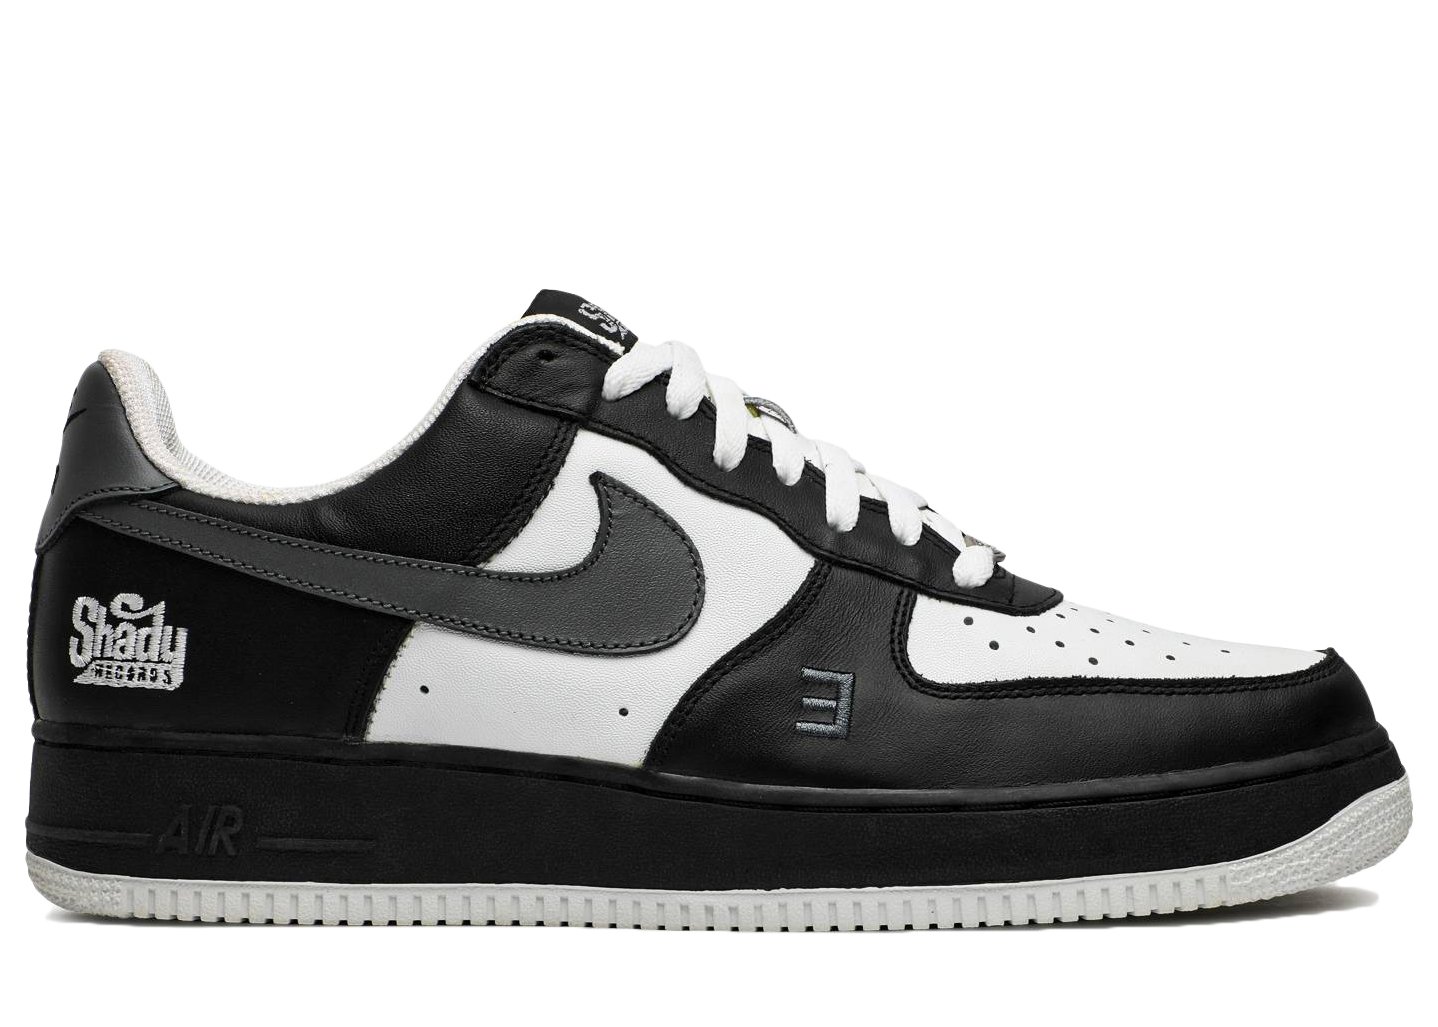 Nike Air Force 1 Low x Eminem 'Shady Records' Black sneaker informations